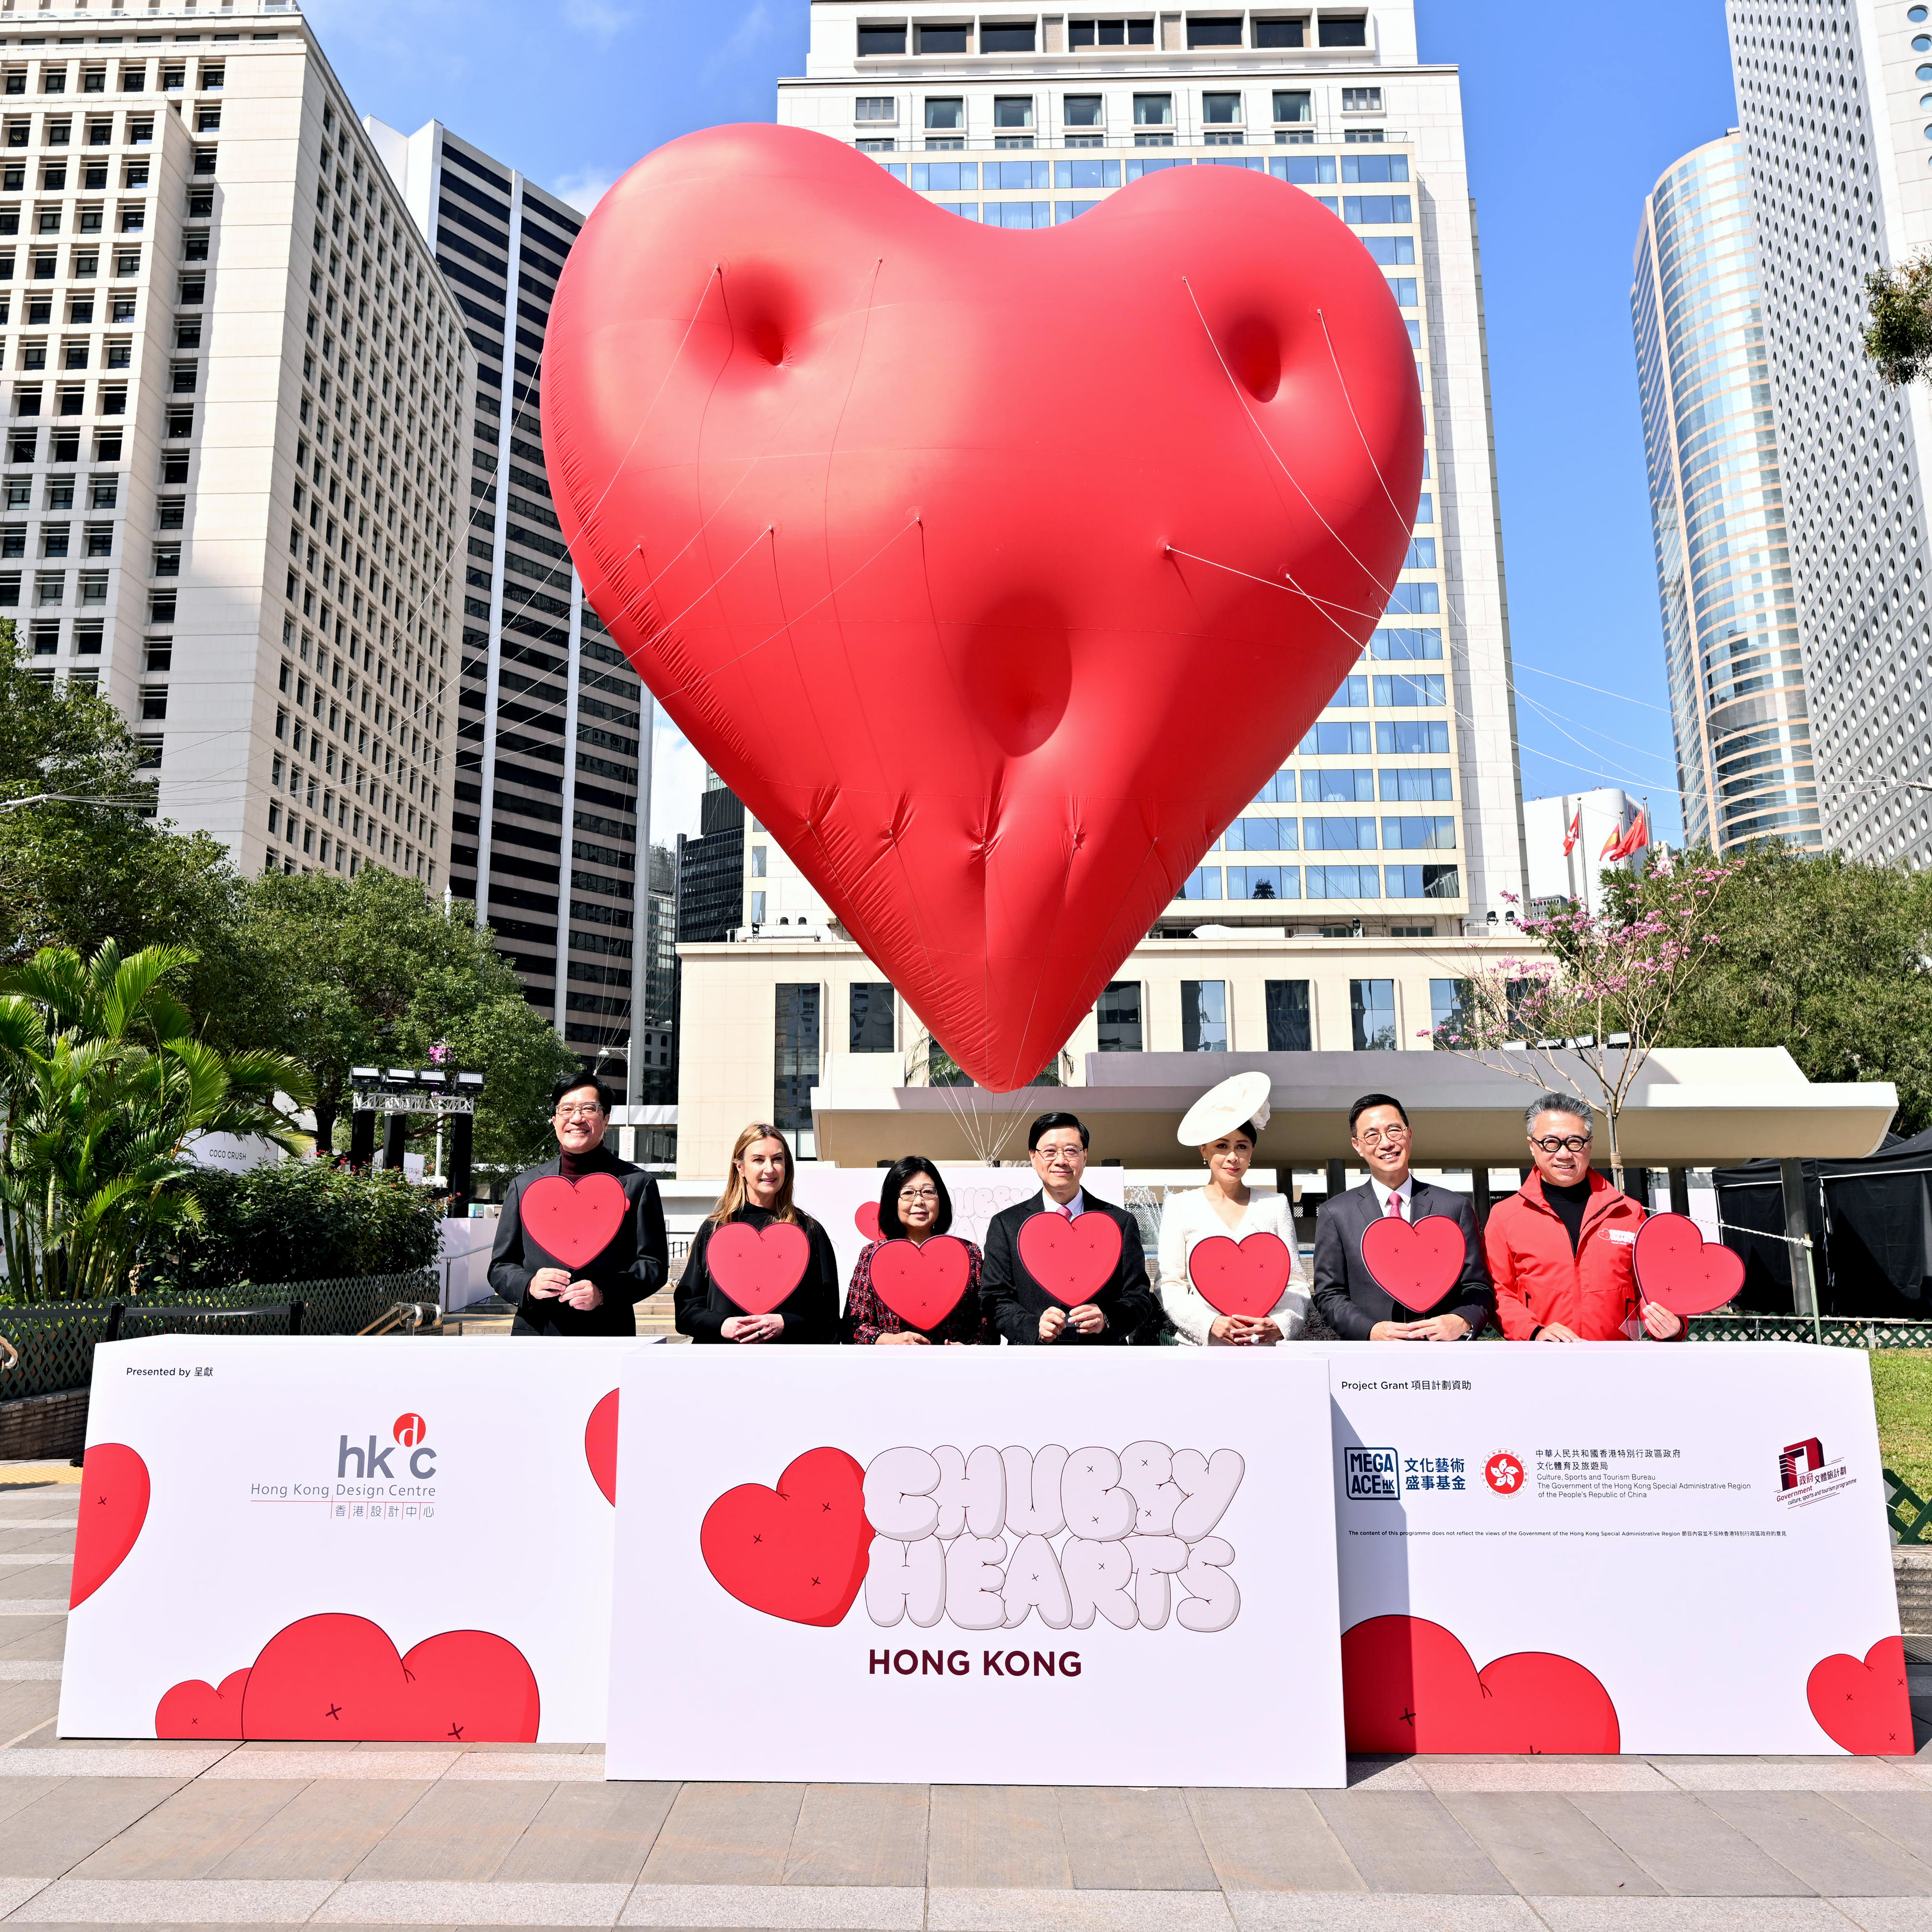 Hong Kong Design Centre Curates and Presents: ‘Chubby Hearts Hong Kong’ Officially Kicks Off on Valentine’s Day